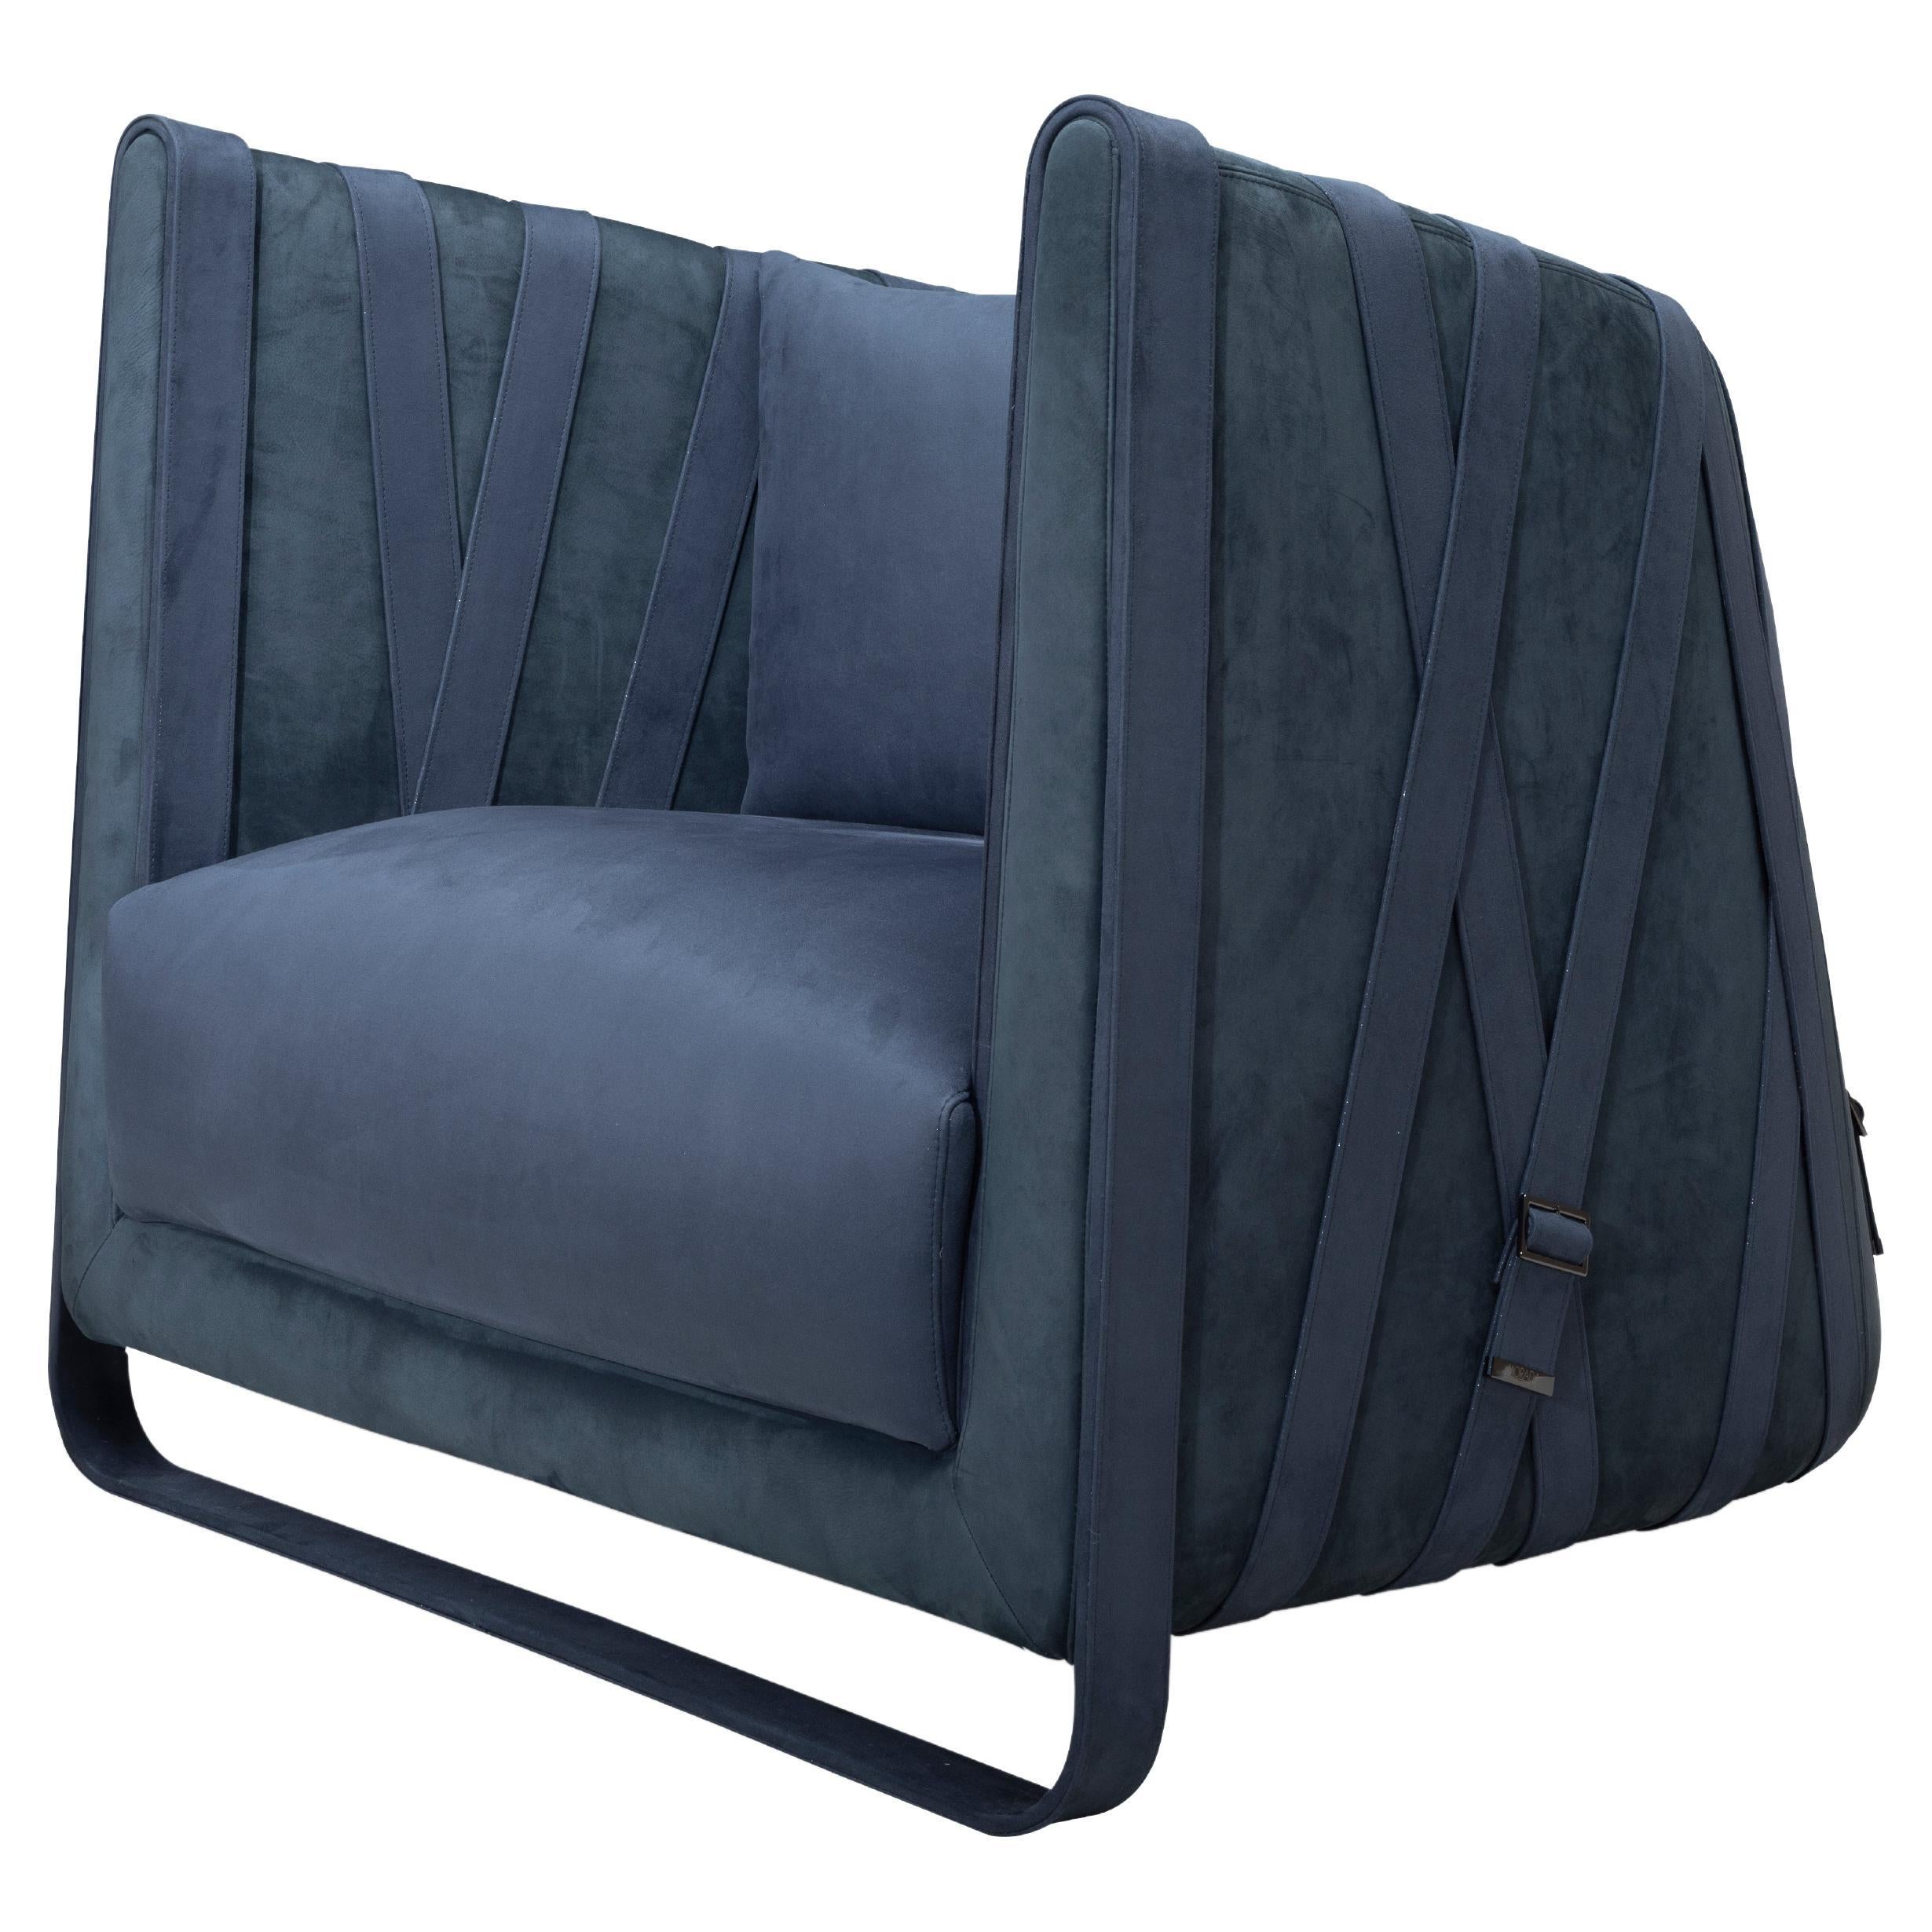 Modern Armchair with Leather Belt Details, Navy